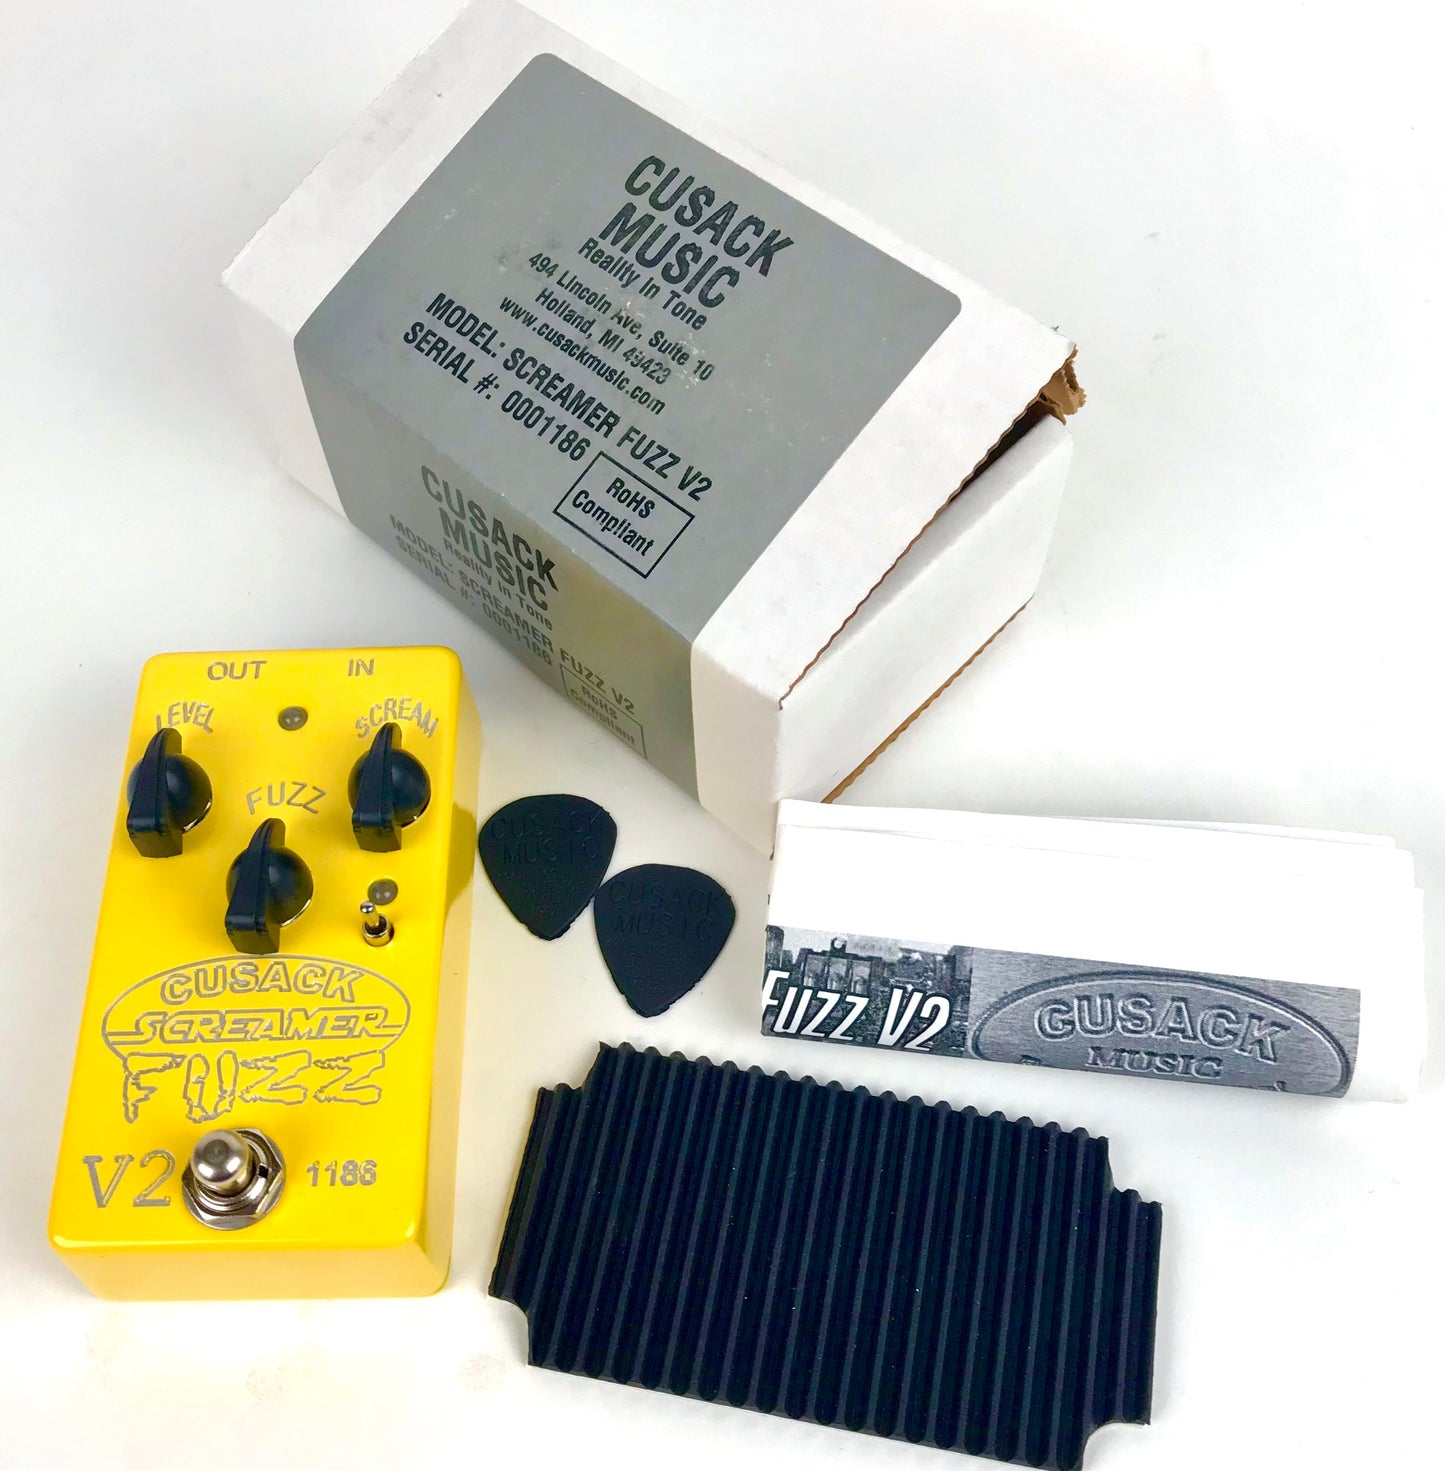 Cusack Music Screamer Fuzz V2, brand new old stock, etched graphics!